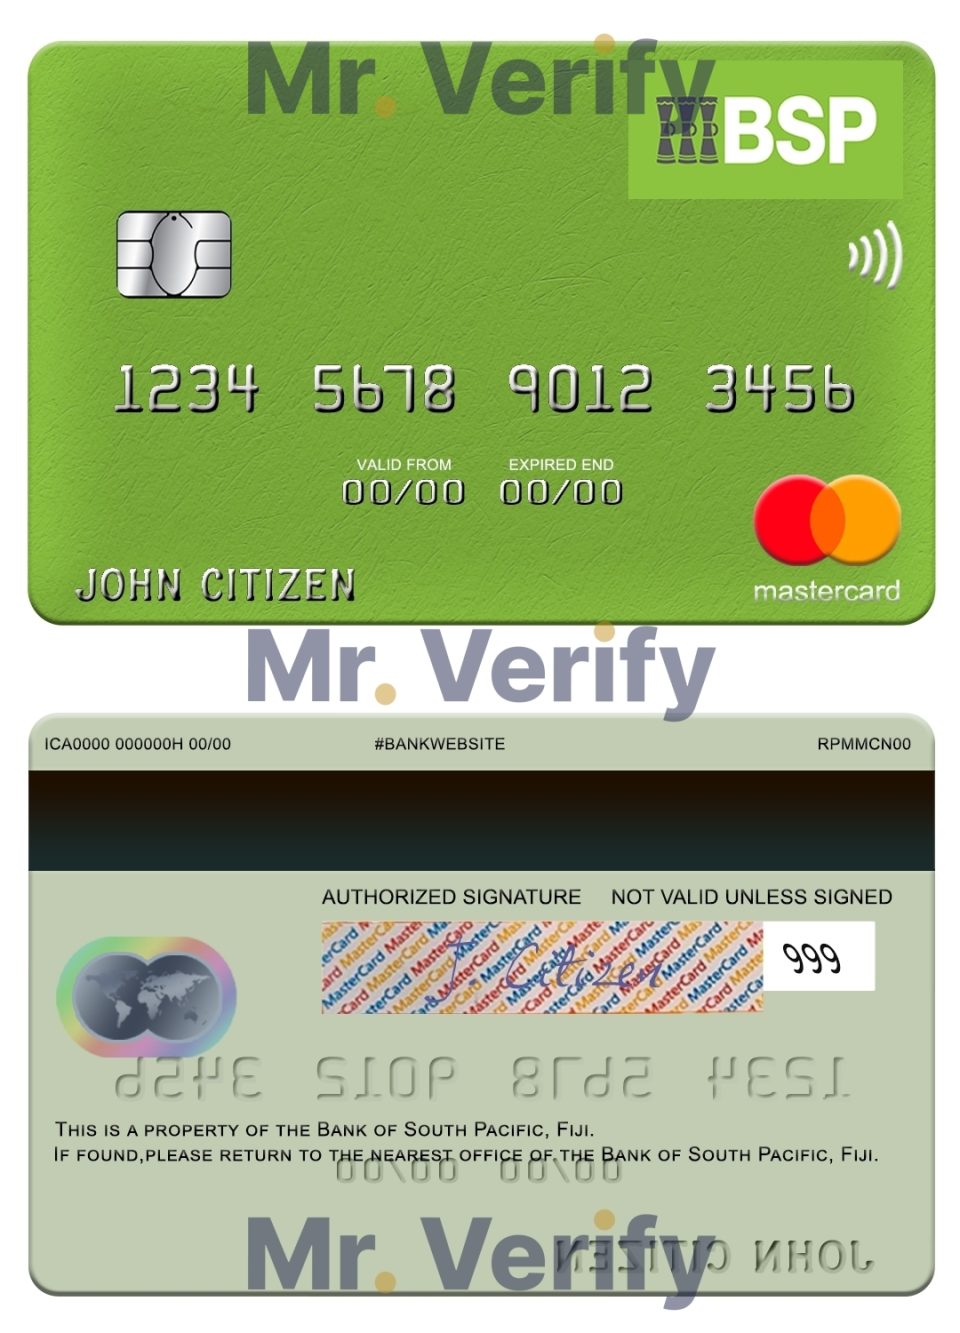 Editable Fiji Bank of South Pacific mastercard credit card Templates in PSD Format